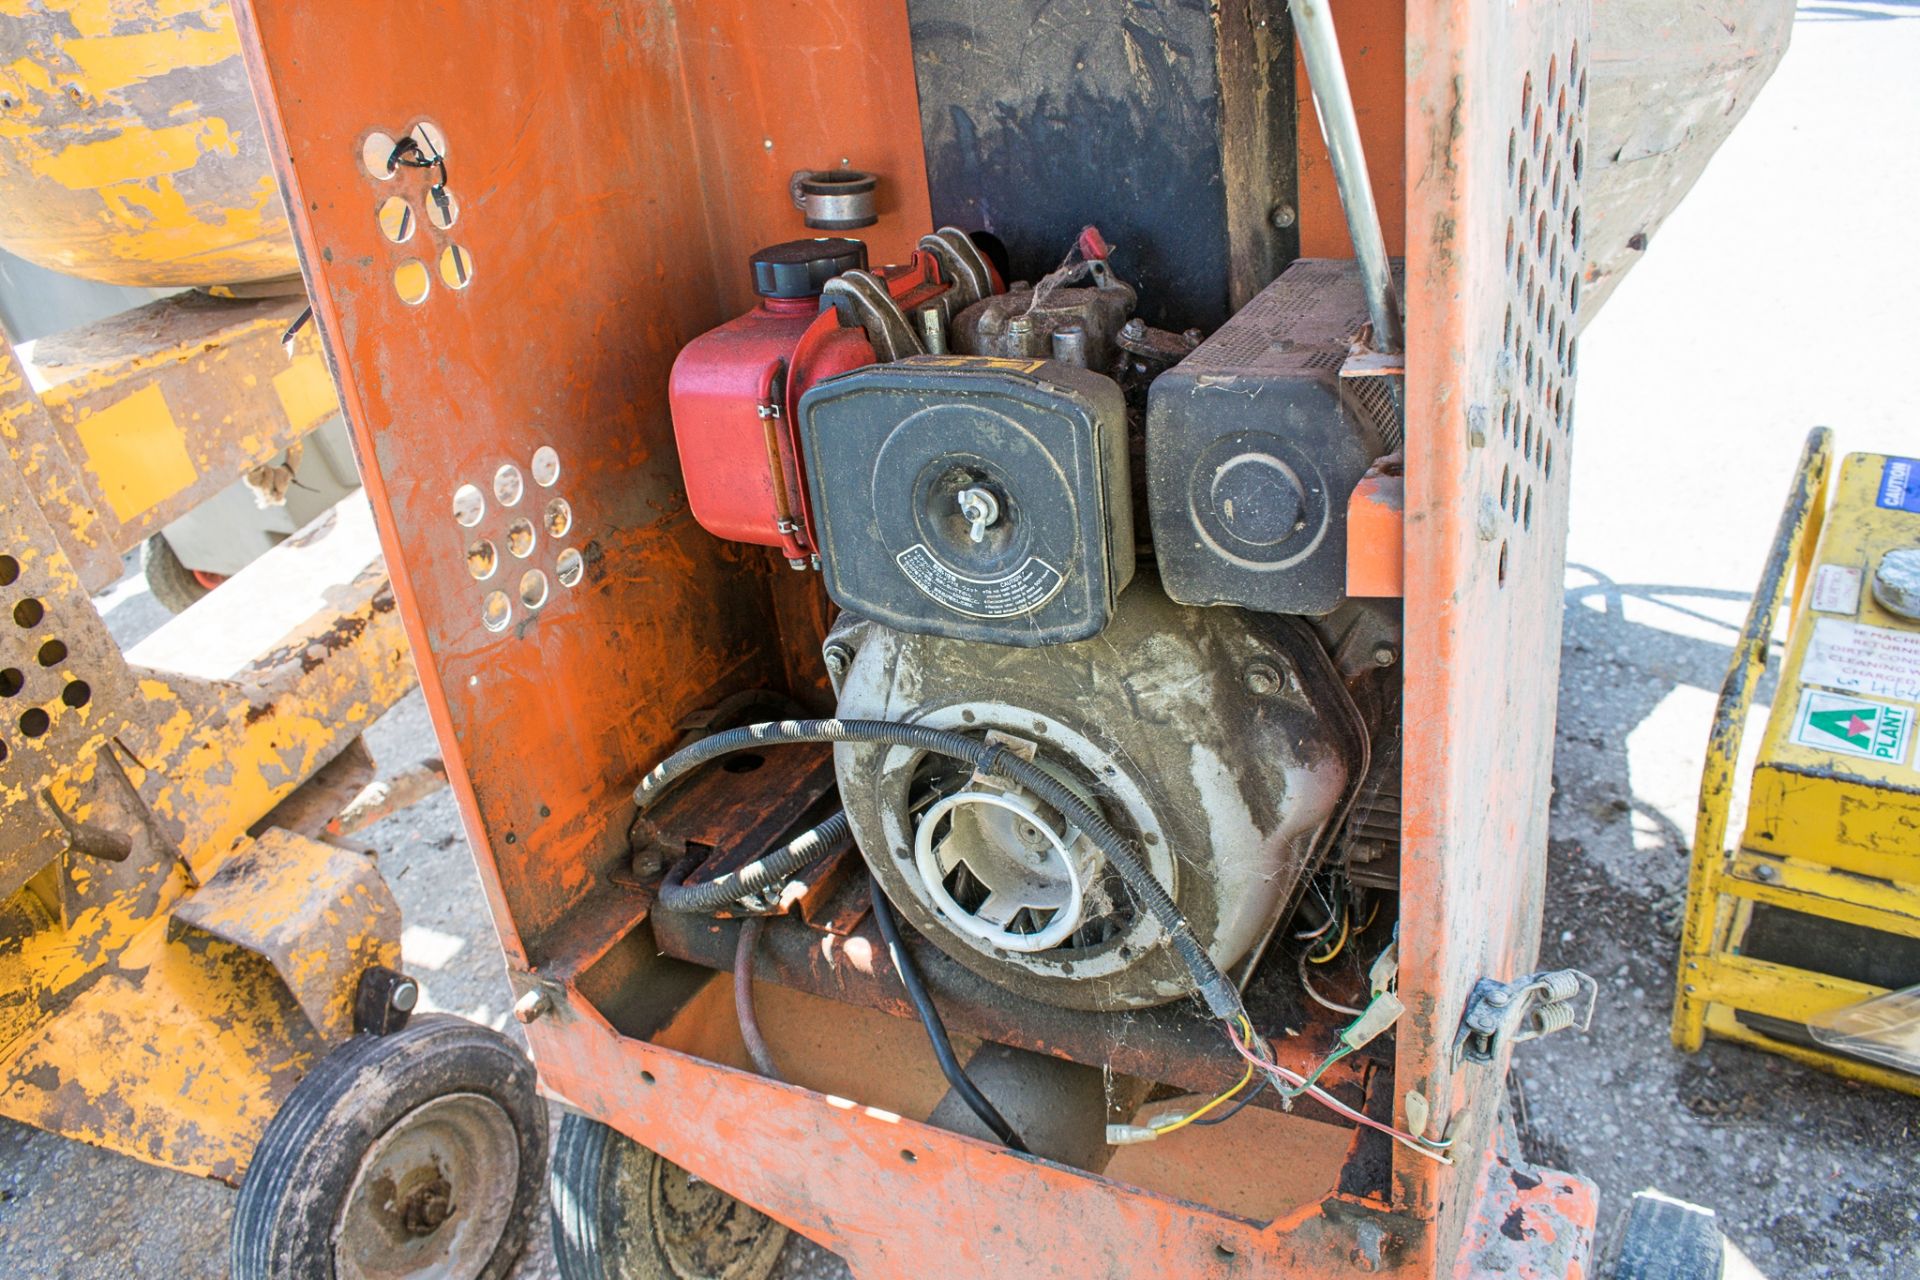 Belle 100XT diesel driven site mixer A58026 ** Front axle missing ** ** No pull start ** - Image 2 of 2